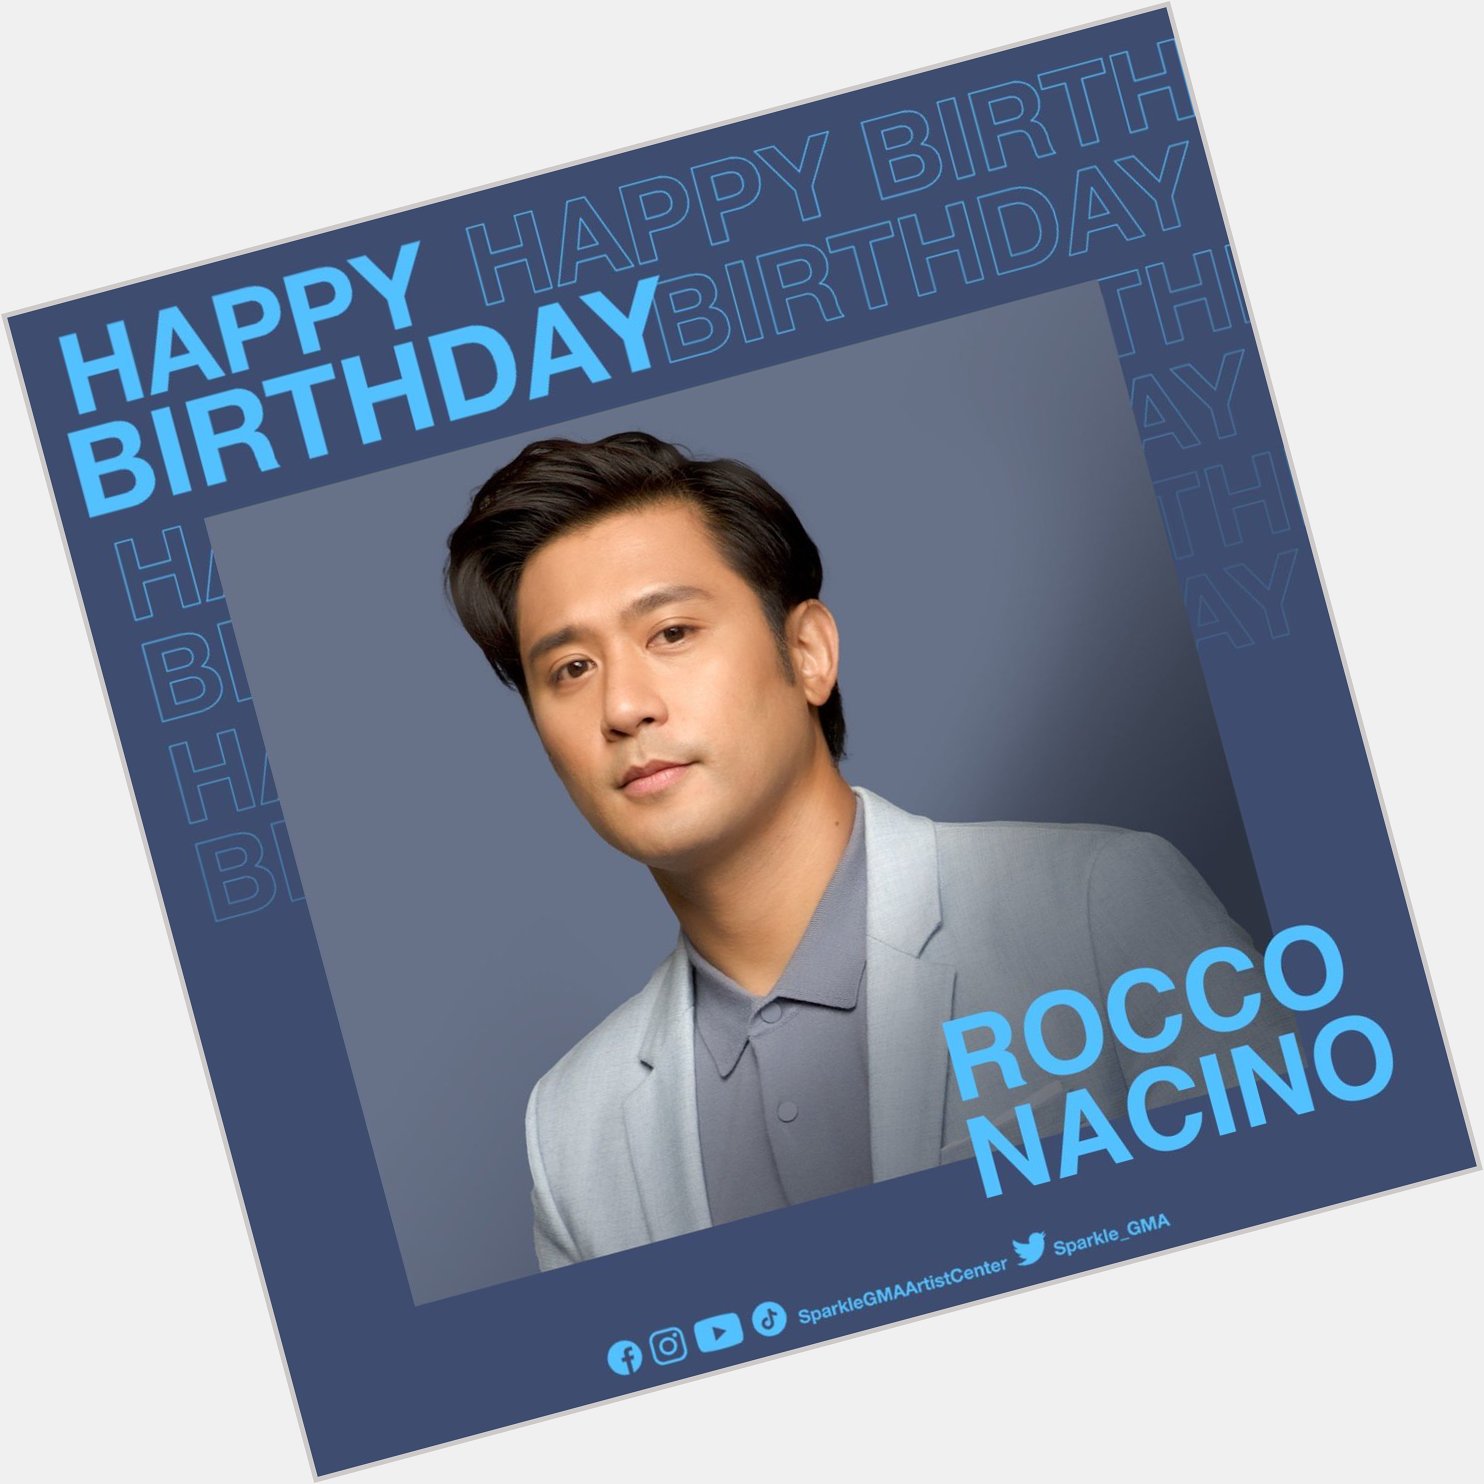 Happy birthday, Rocco Nacino! May all your wishes come true today and every day.   